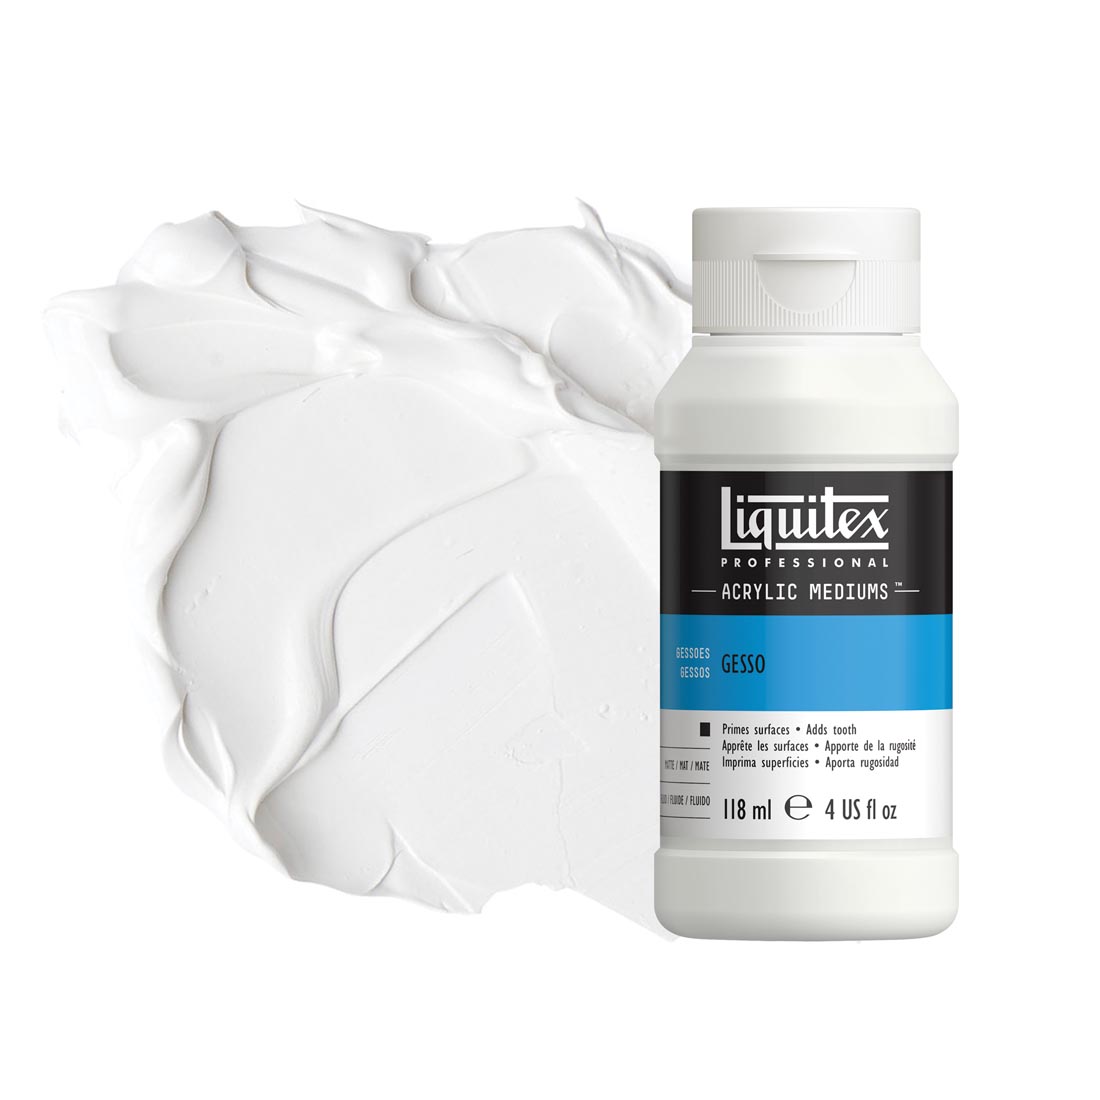 Liquitex Acrylic Gesso, White, 4 oz. Bottle, with sample of product in background